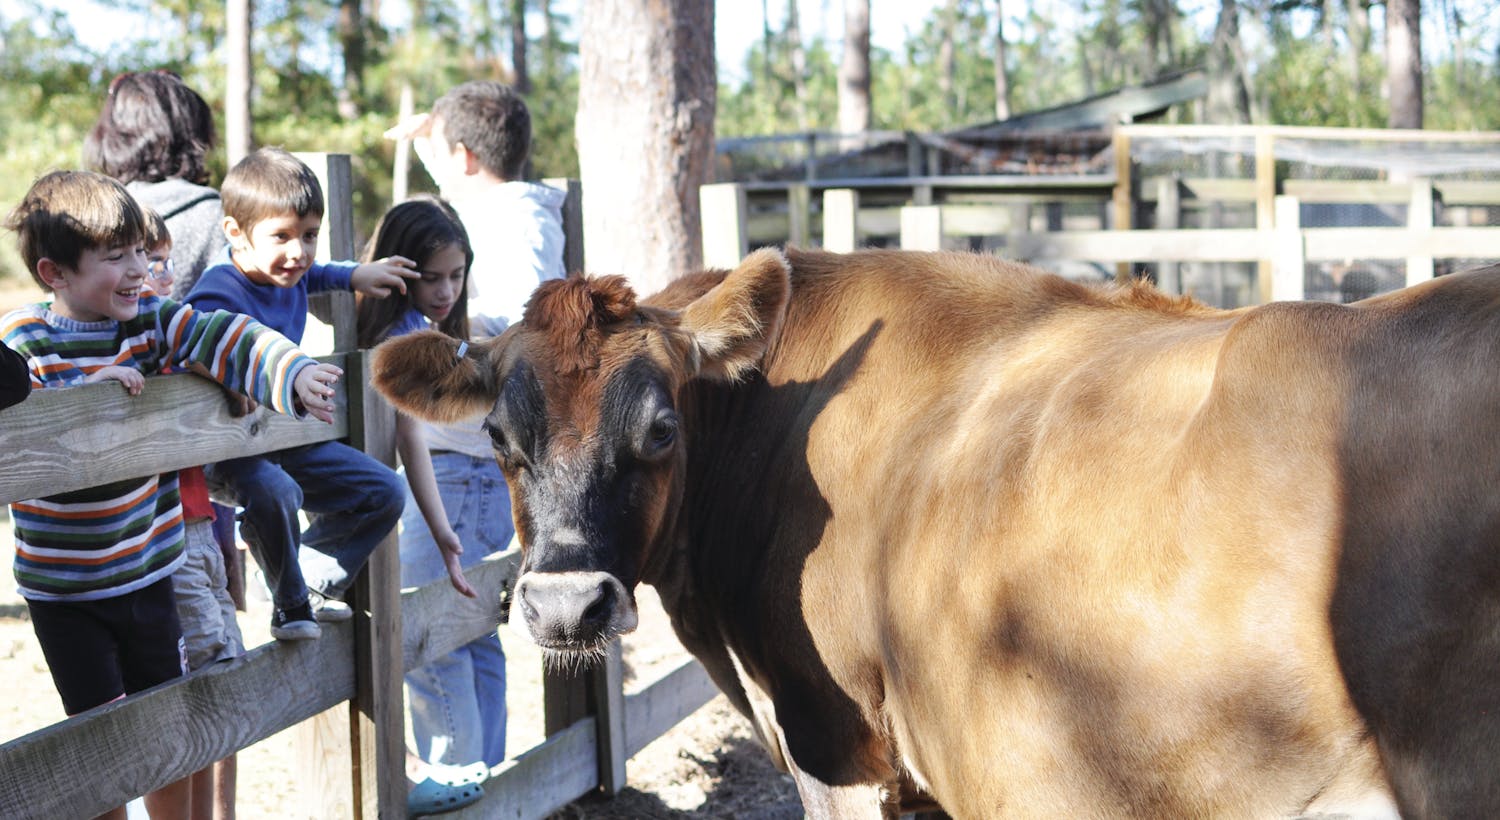 Alachua County children play with farm animals at Morningside Nature Center at the Living History Farm. The farm recreates a single-family farm from the 1870s including live heritage-breed farm animals.